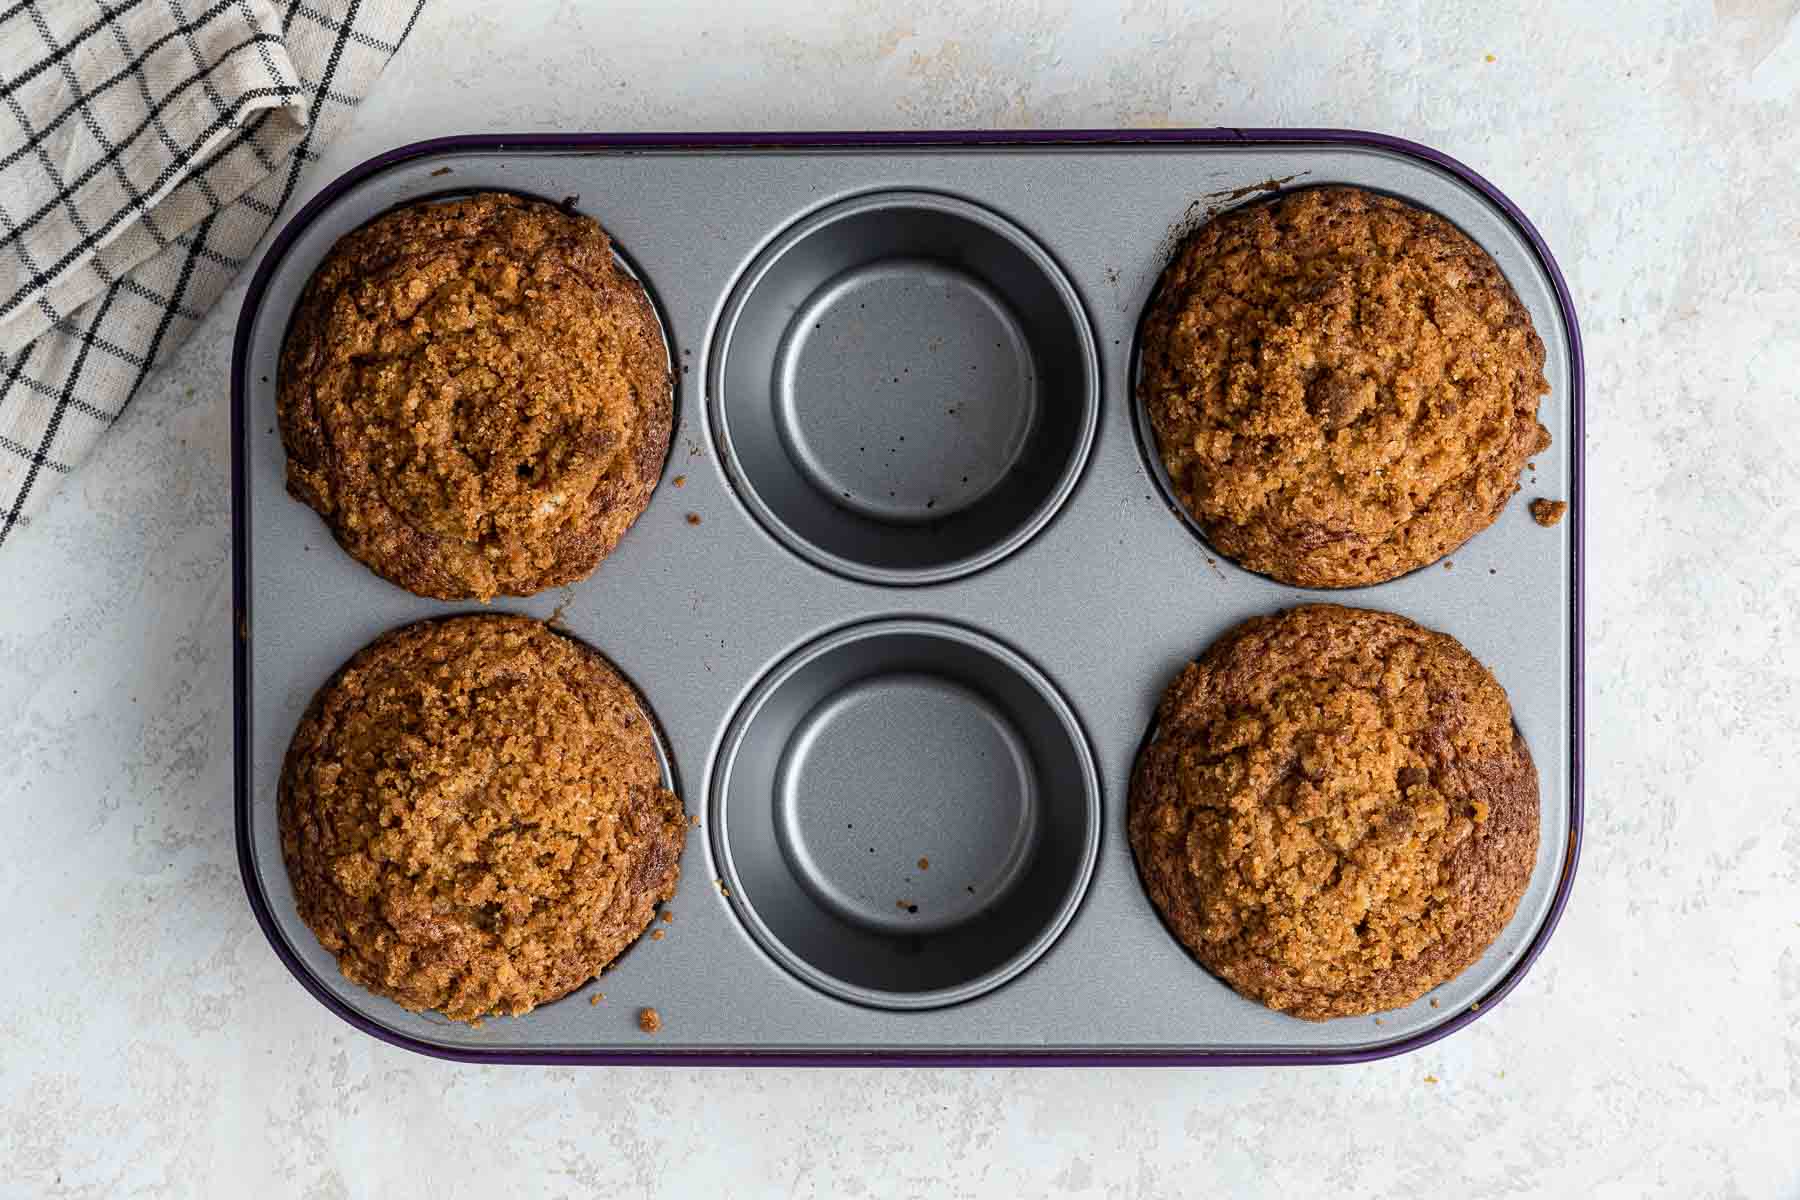 Four domed coffee cake muffins in a pan with only 6 holes.